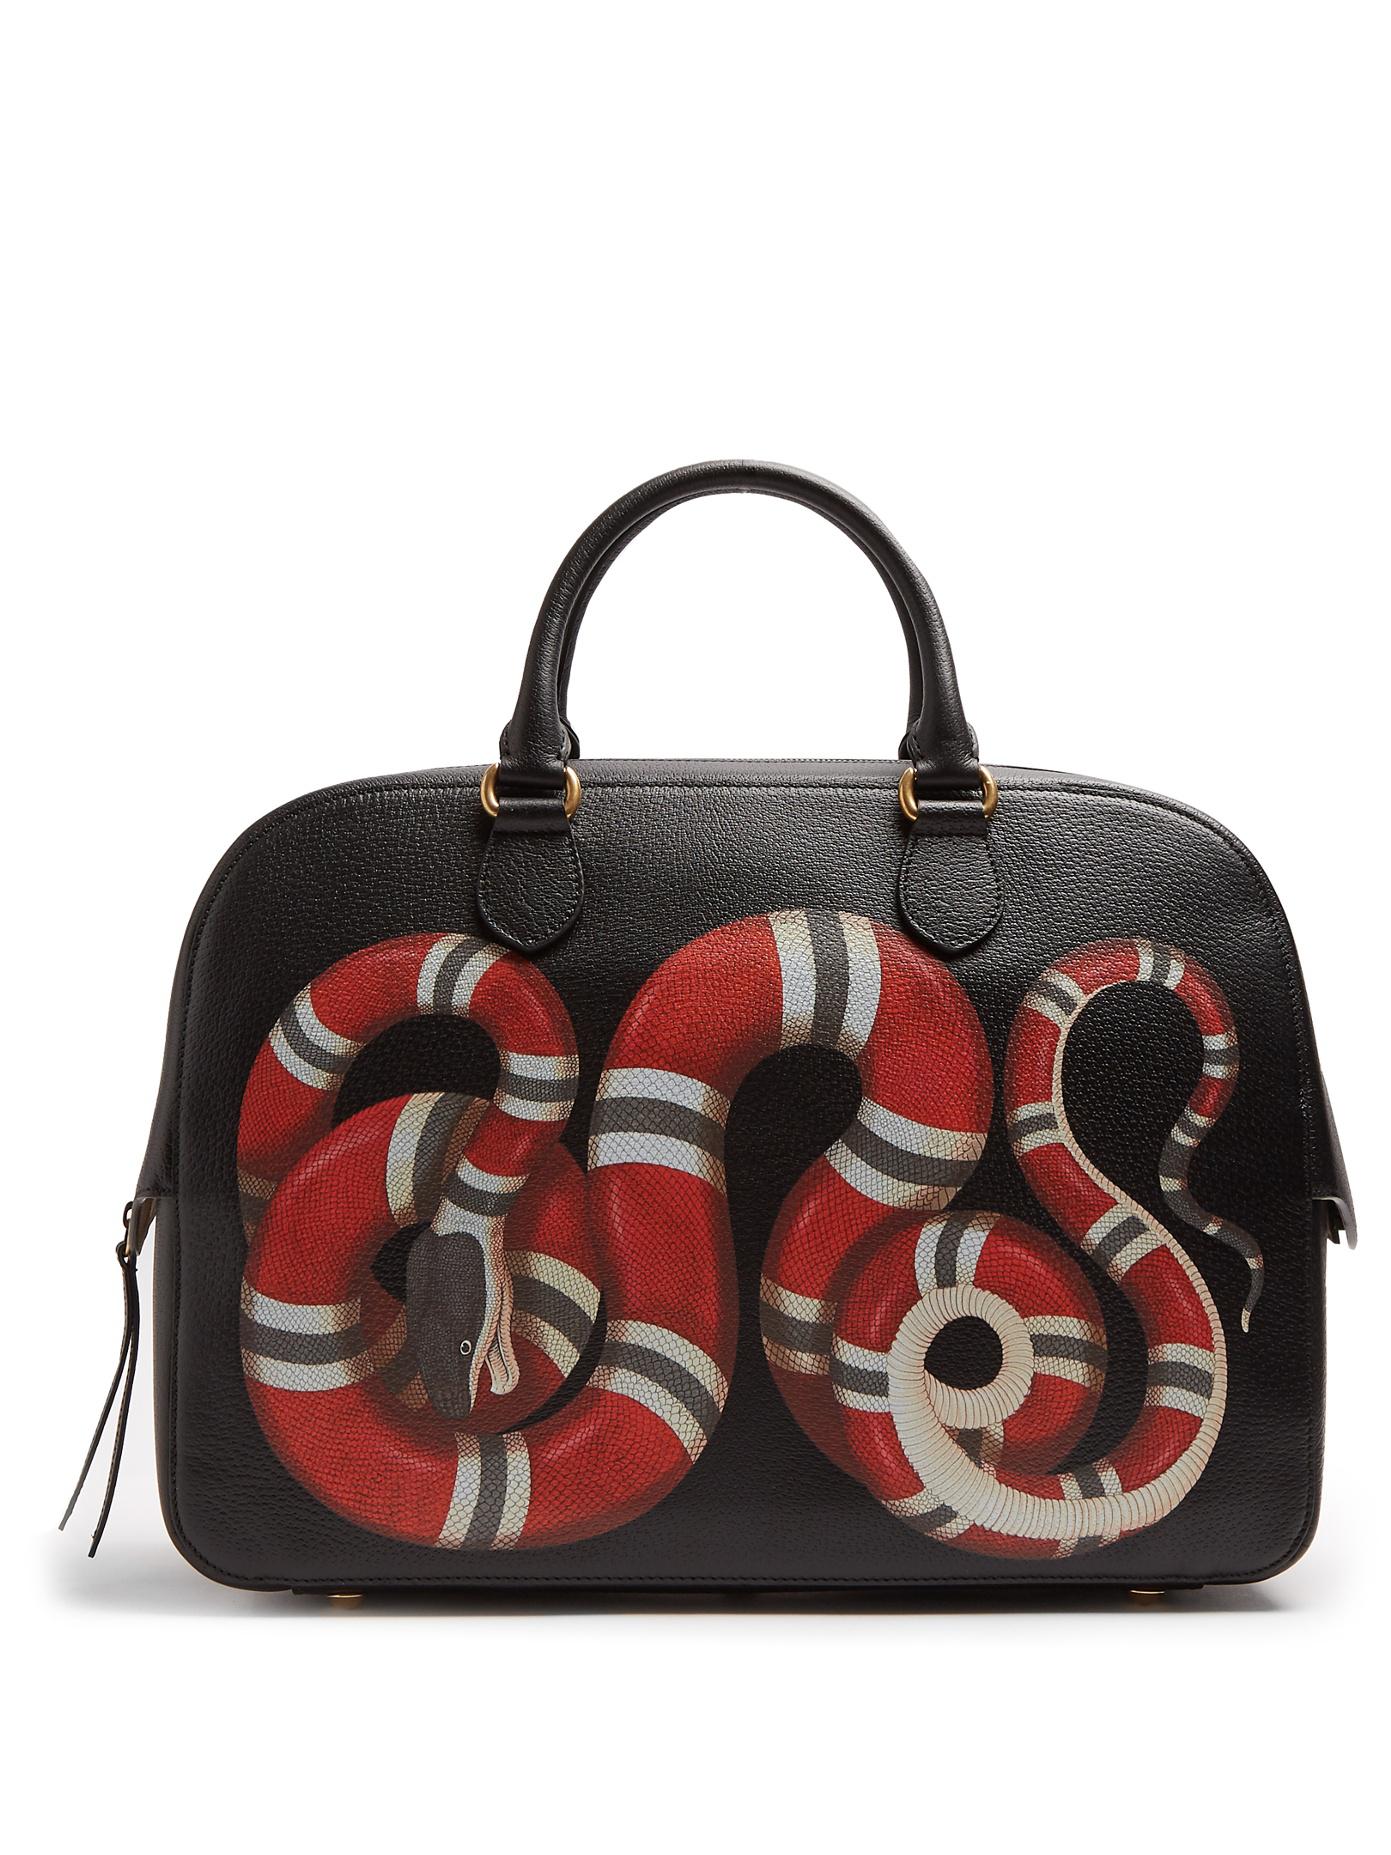 Gucci Snake Print Leather Duffle in Black for Men